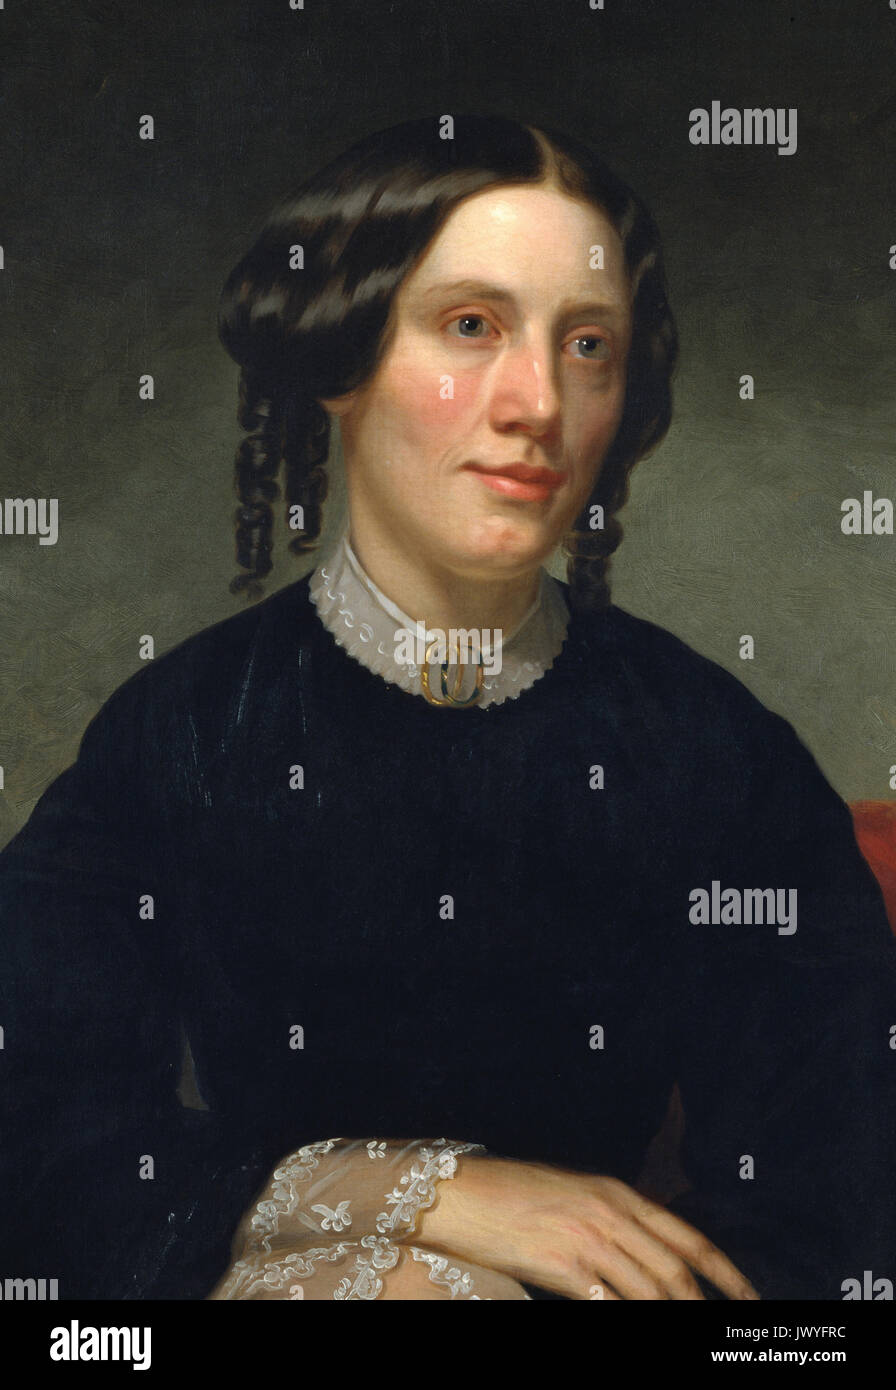 Harriet Beecher Stowe (1811-1896), abolitionist and American author of Uncle Tom's Cabin, from an 1853 oil painting portrait by Alanson Fisher. Stock Photo